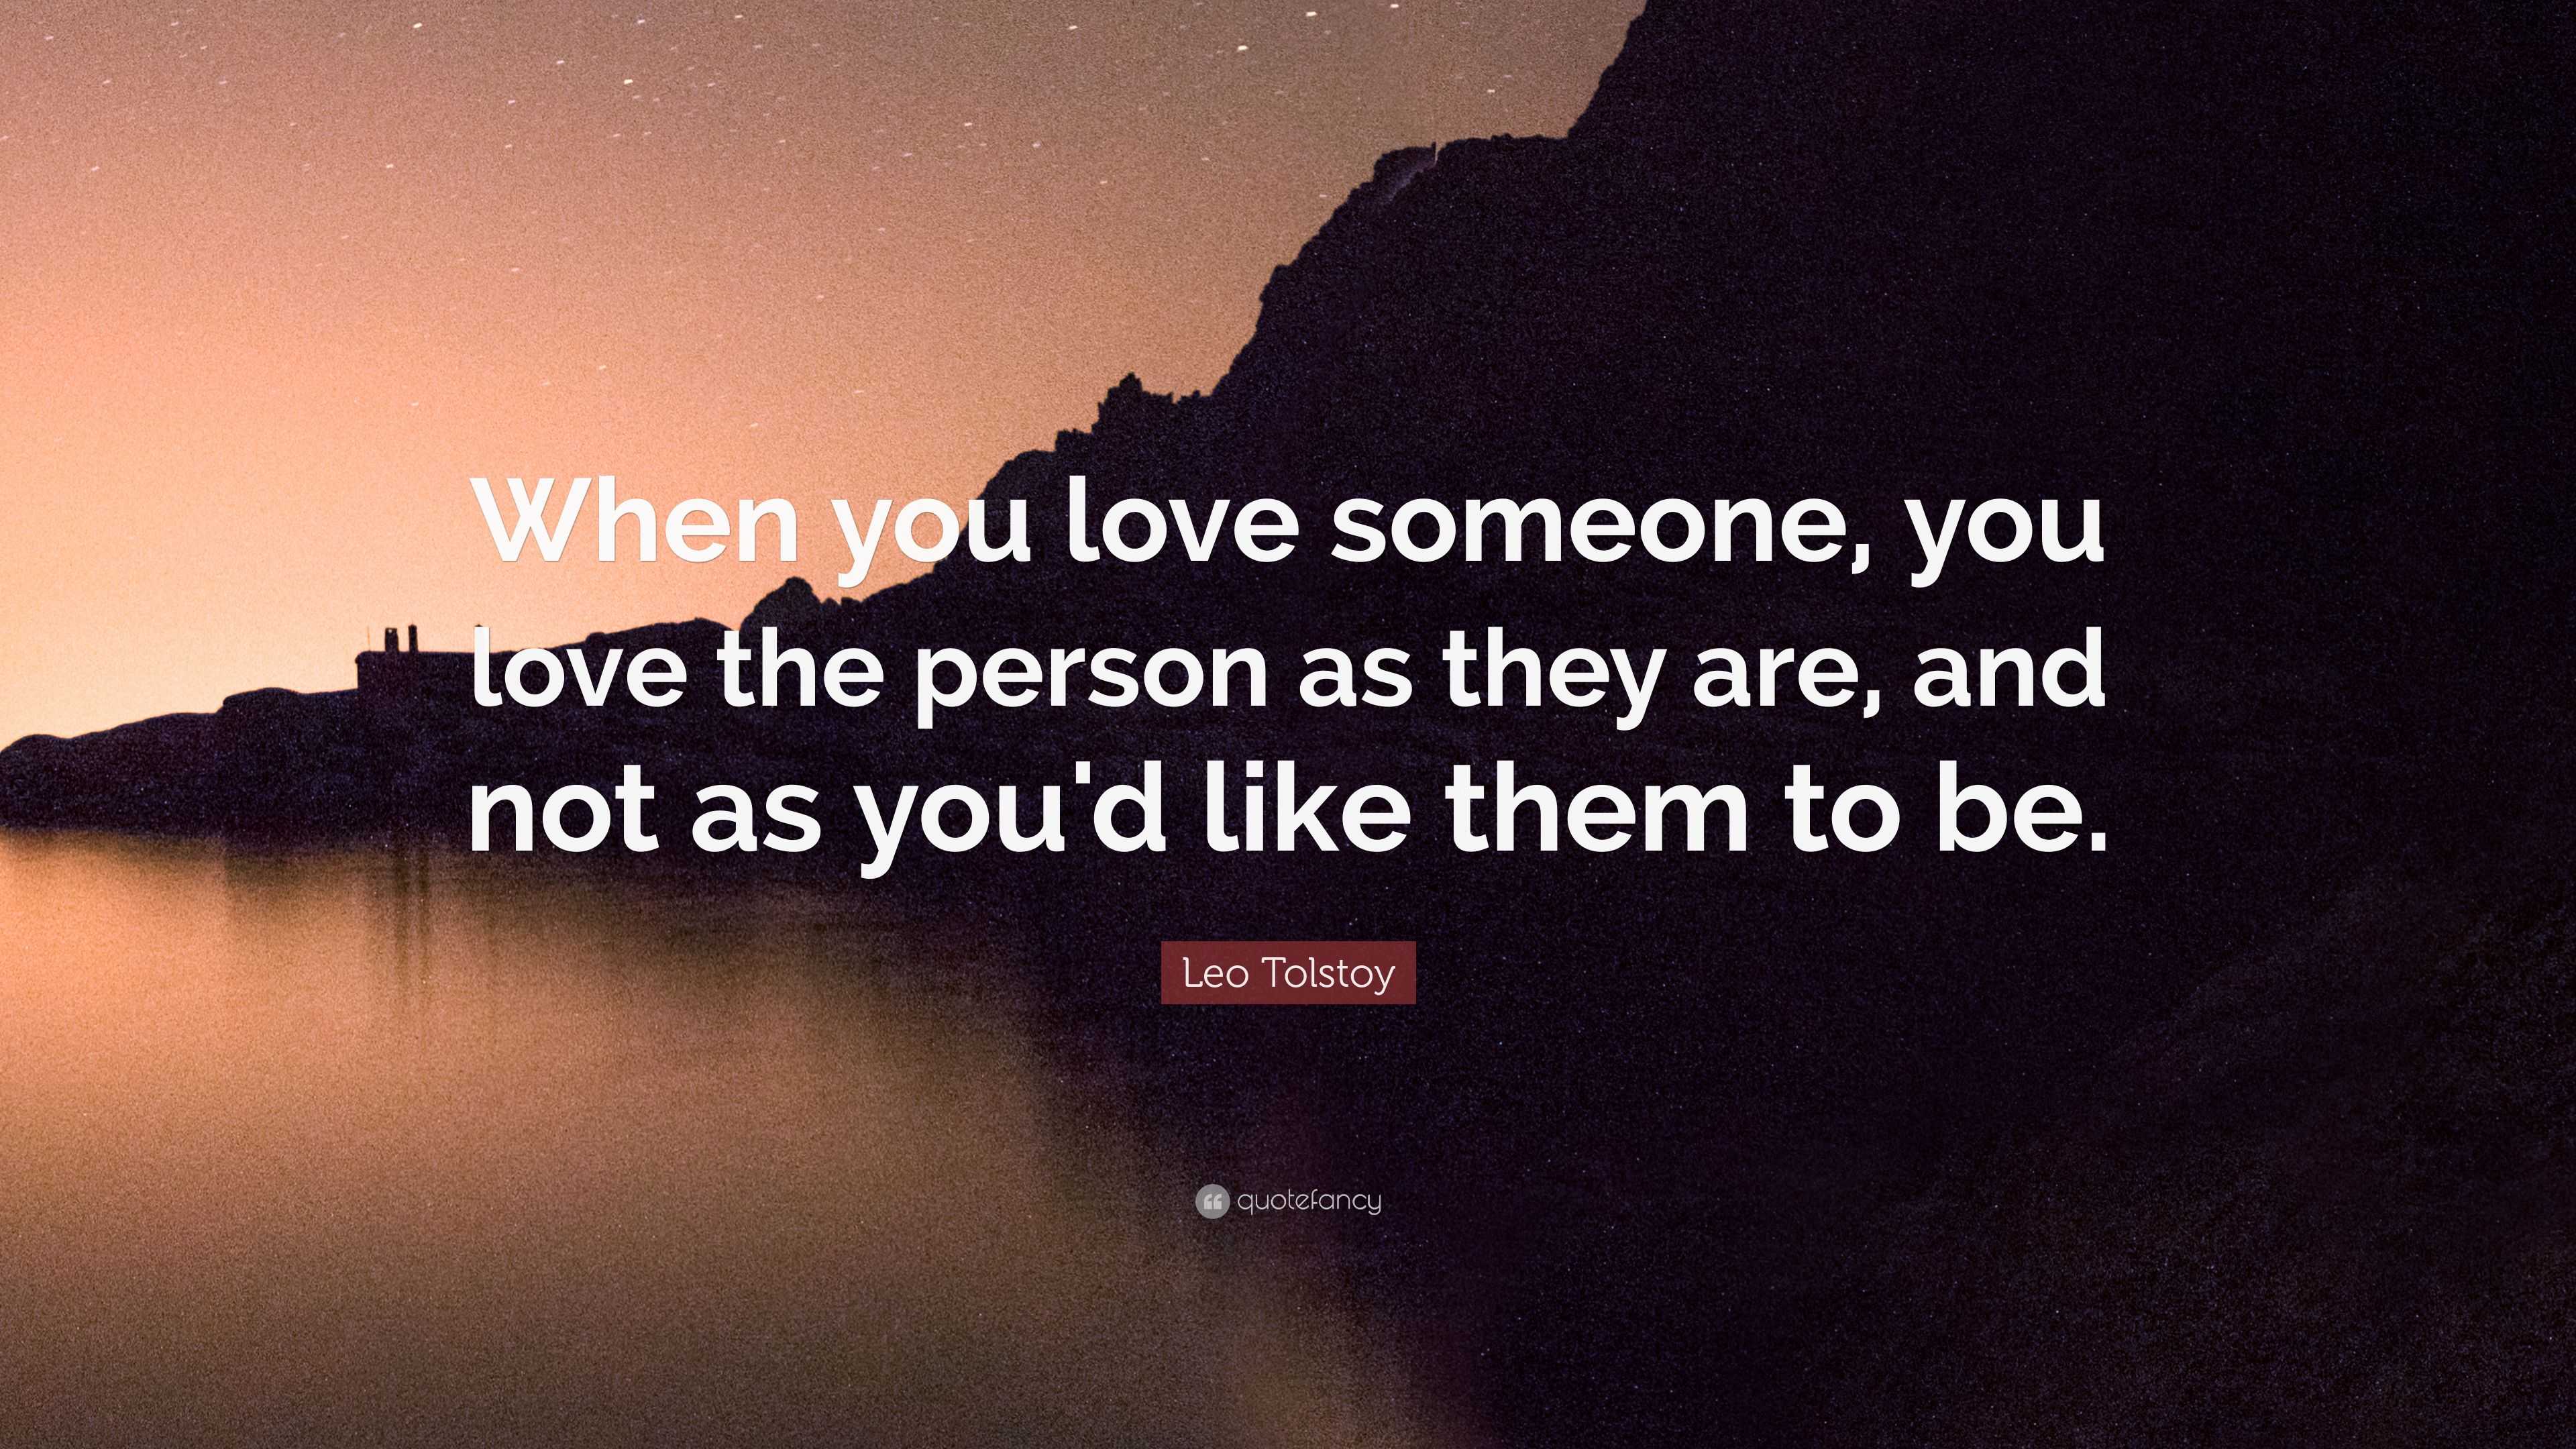 Leo Tolstoy Quote “When you love someone you love the person as they